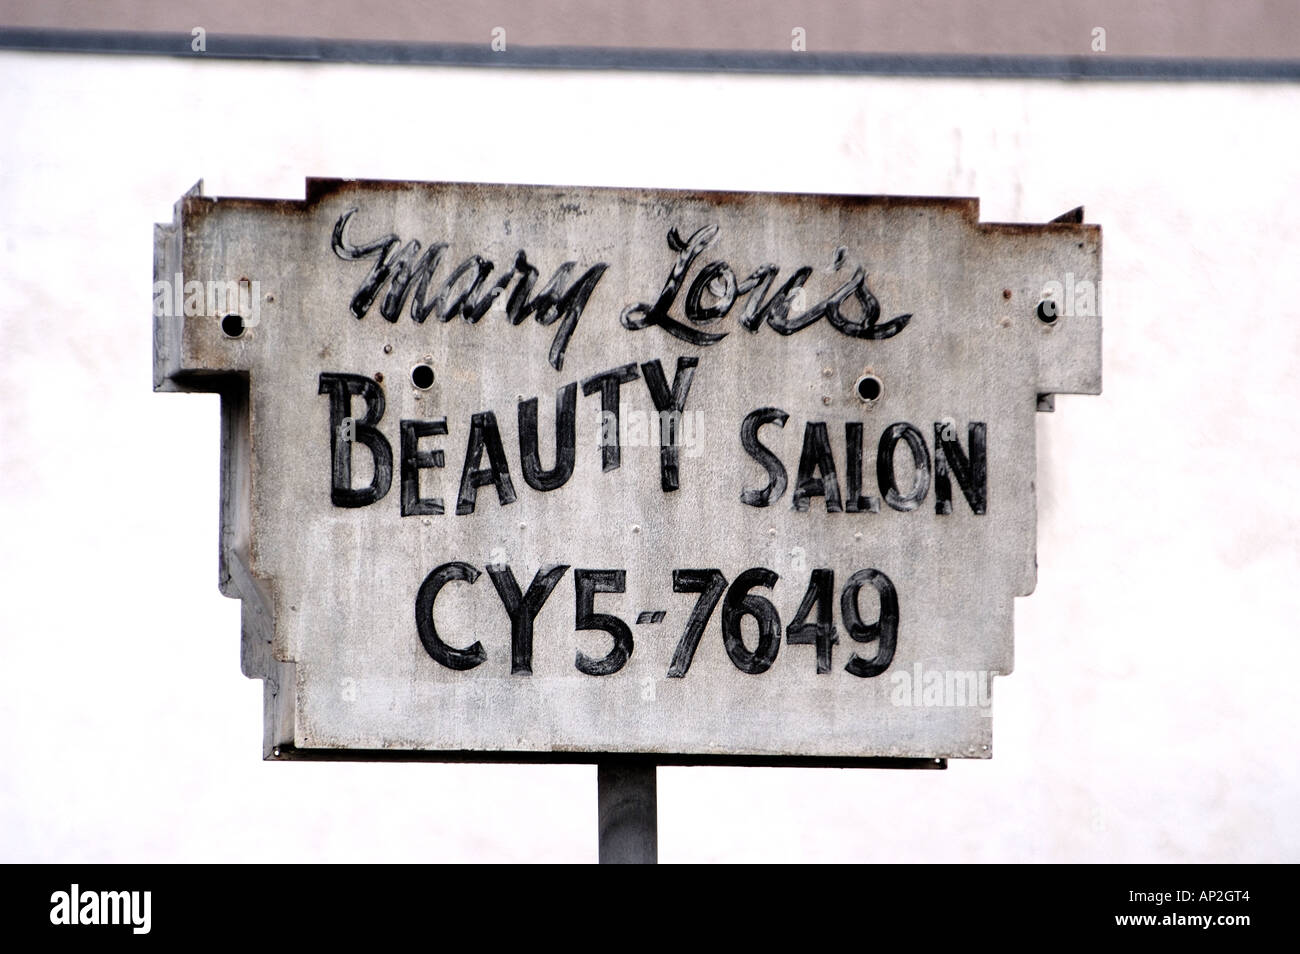 Beauty salon sign showing old style exchange telephone number Hillcrest, San Diego California USA Stock Photo